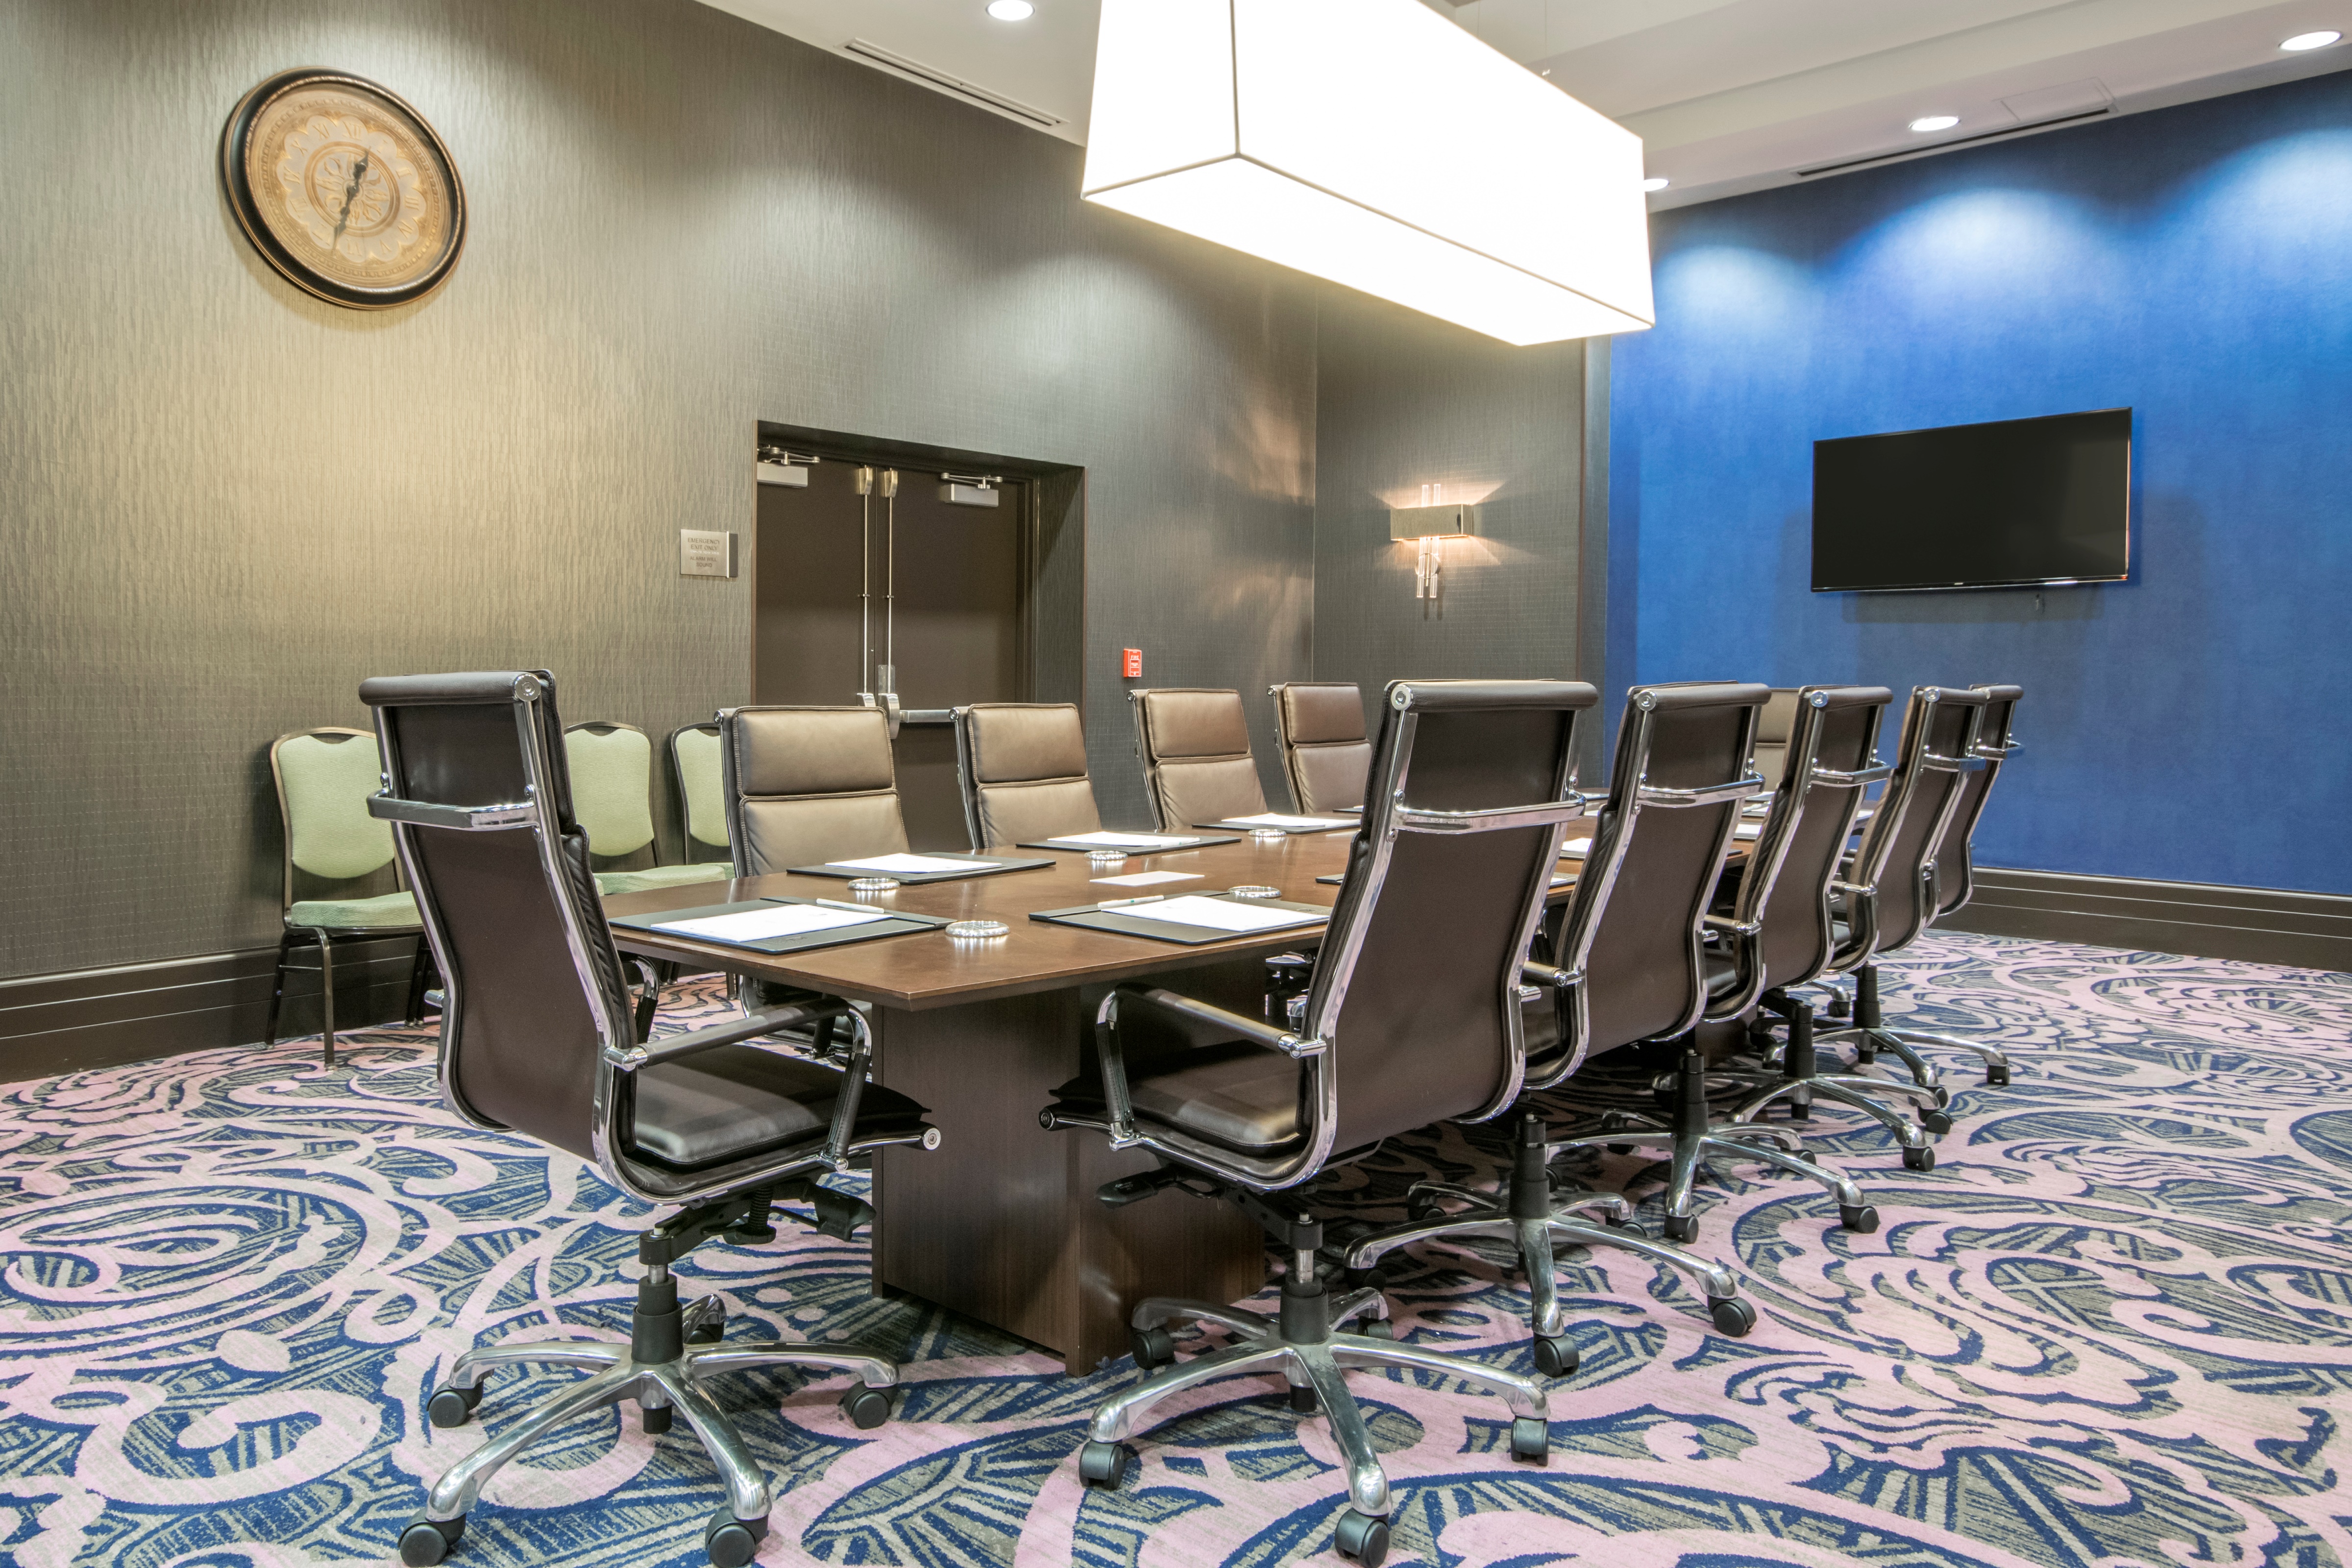 BOardroom Table with Leather Chairs